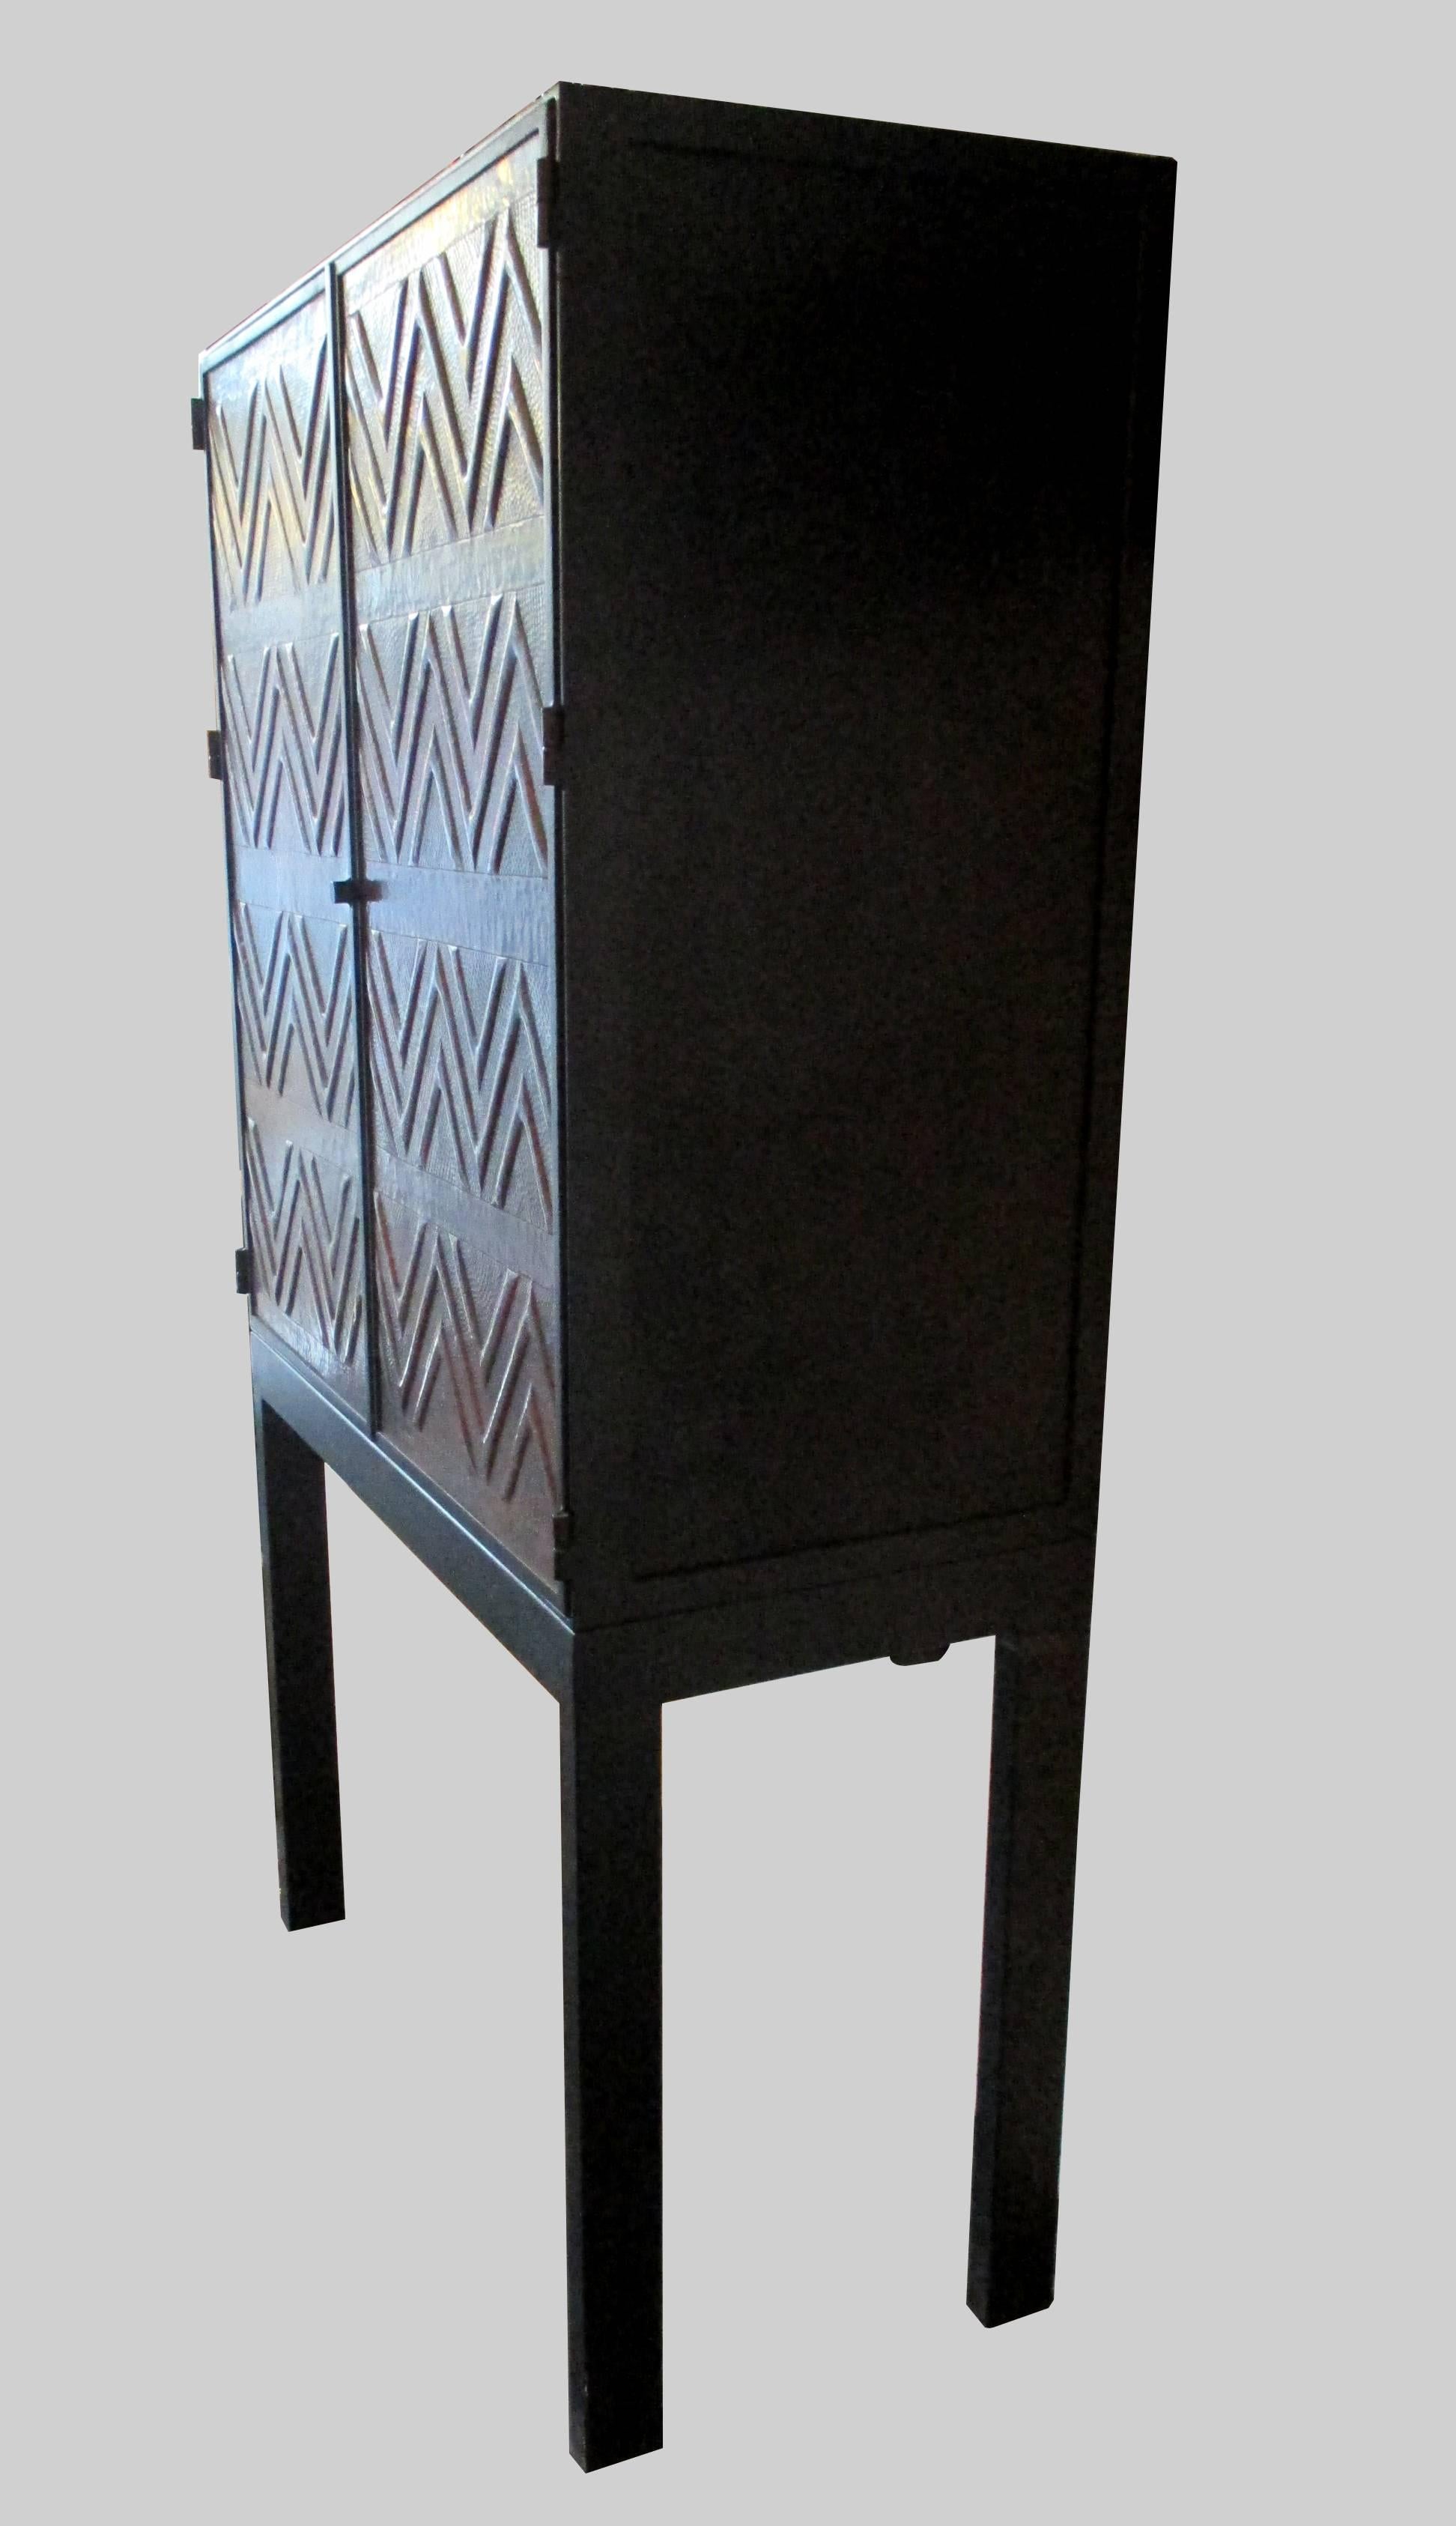 A tall cabinet in steel with masterfully crafted copper doors. The interior is in mirror and glass. Also it includes led lighting on the inside when the doors are opened.